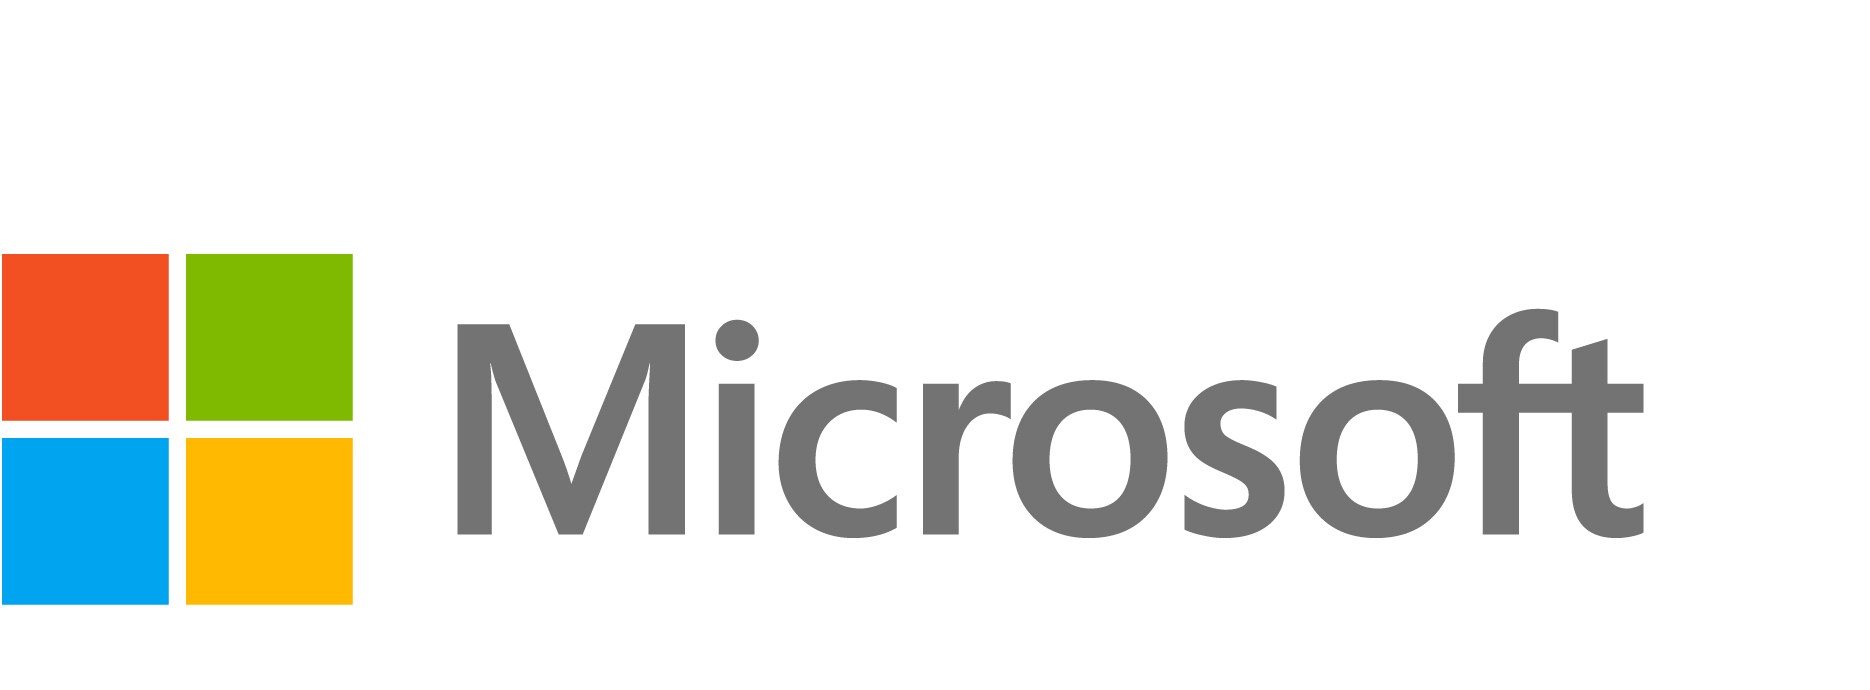 Microsoft Extended Hardware Service Plan Plus - extended service agreement - 3 years - shipment